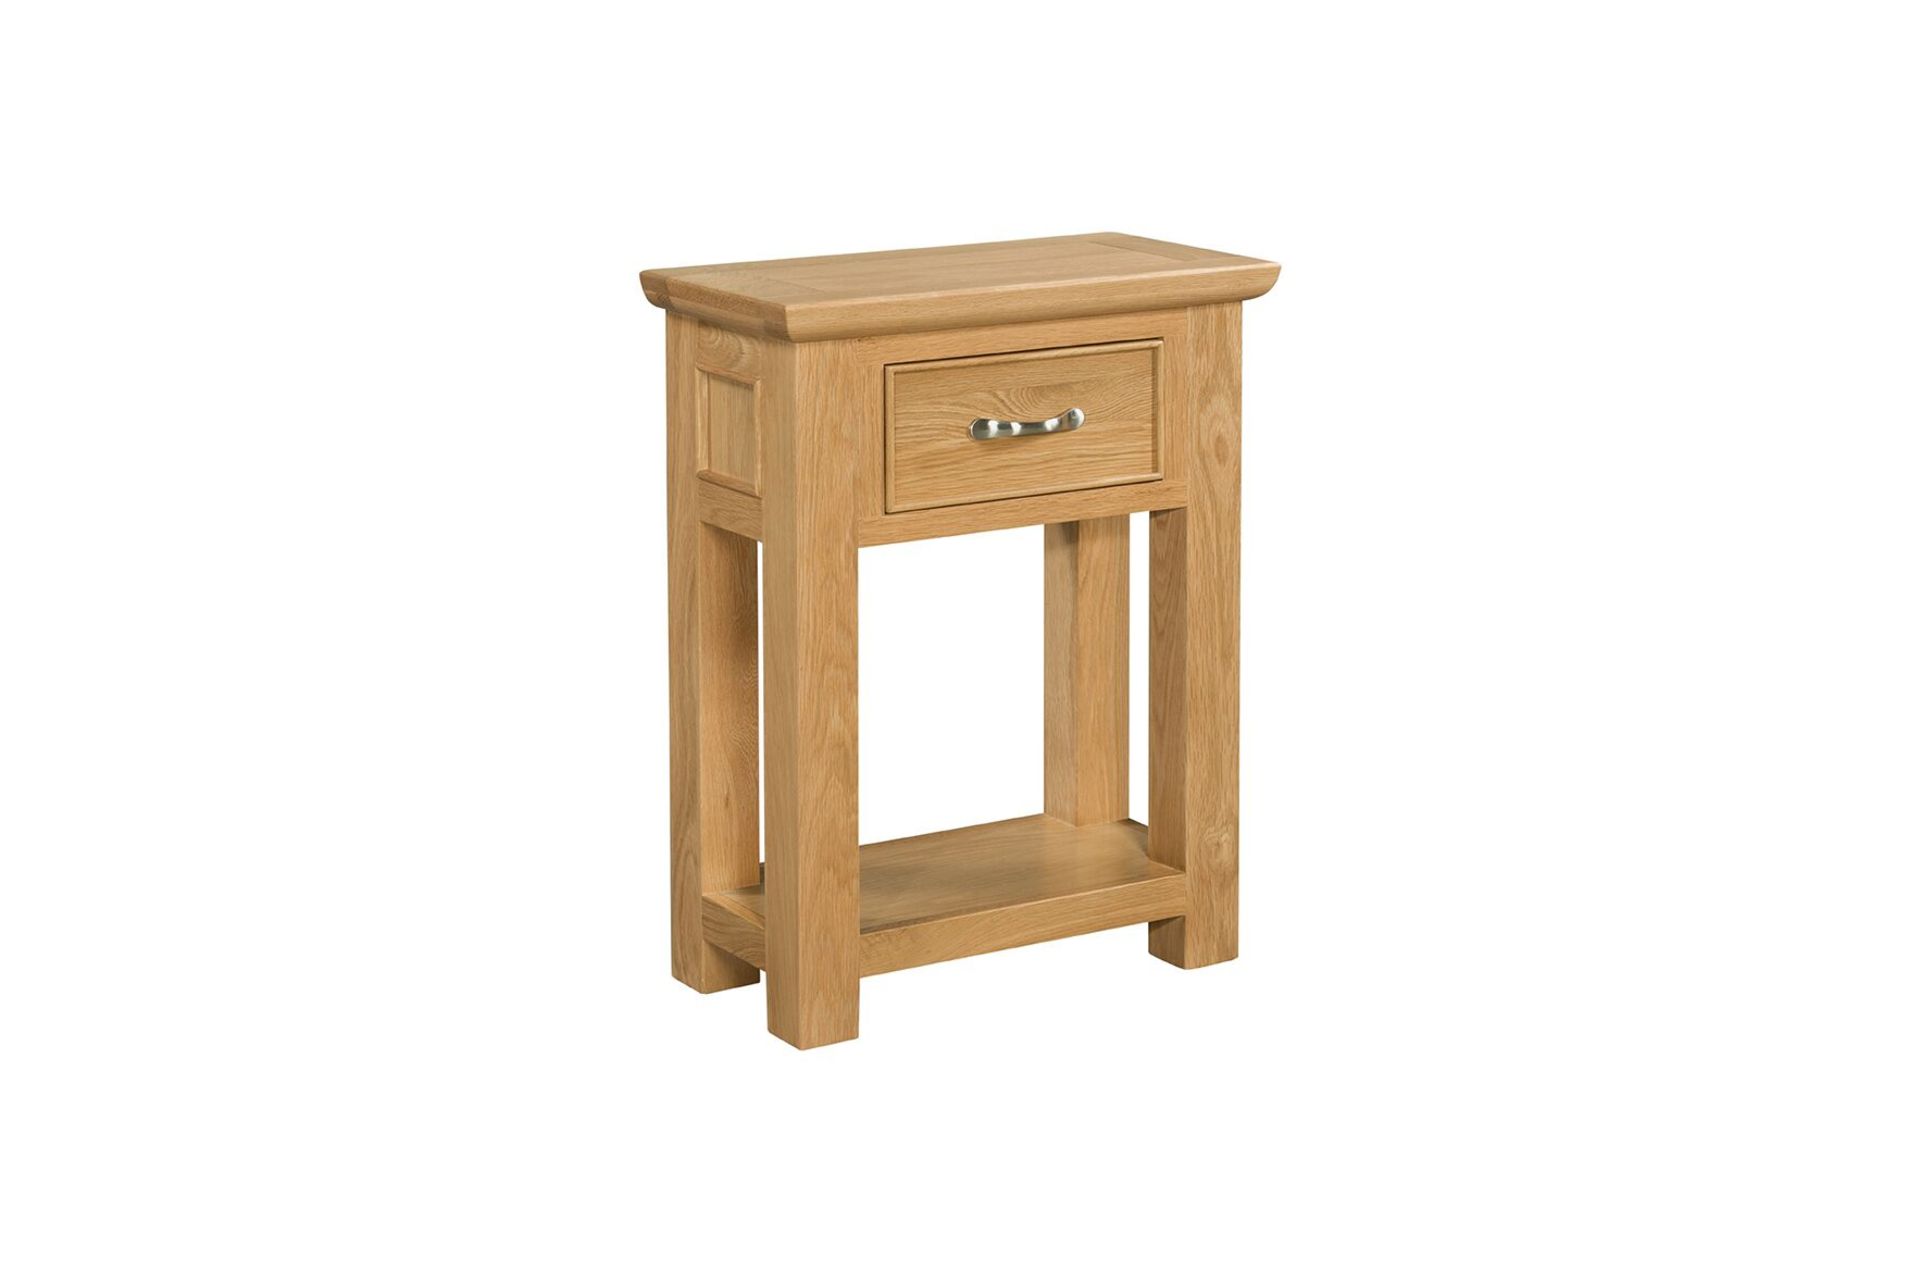 V Brand New Siena Small console with 1 drawer 60 x 30 x 75 cms RRP209.00 (Devonshirepineandoak.co.